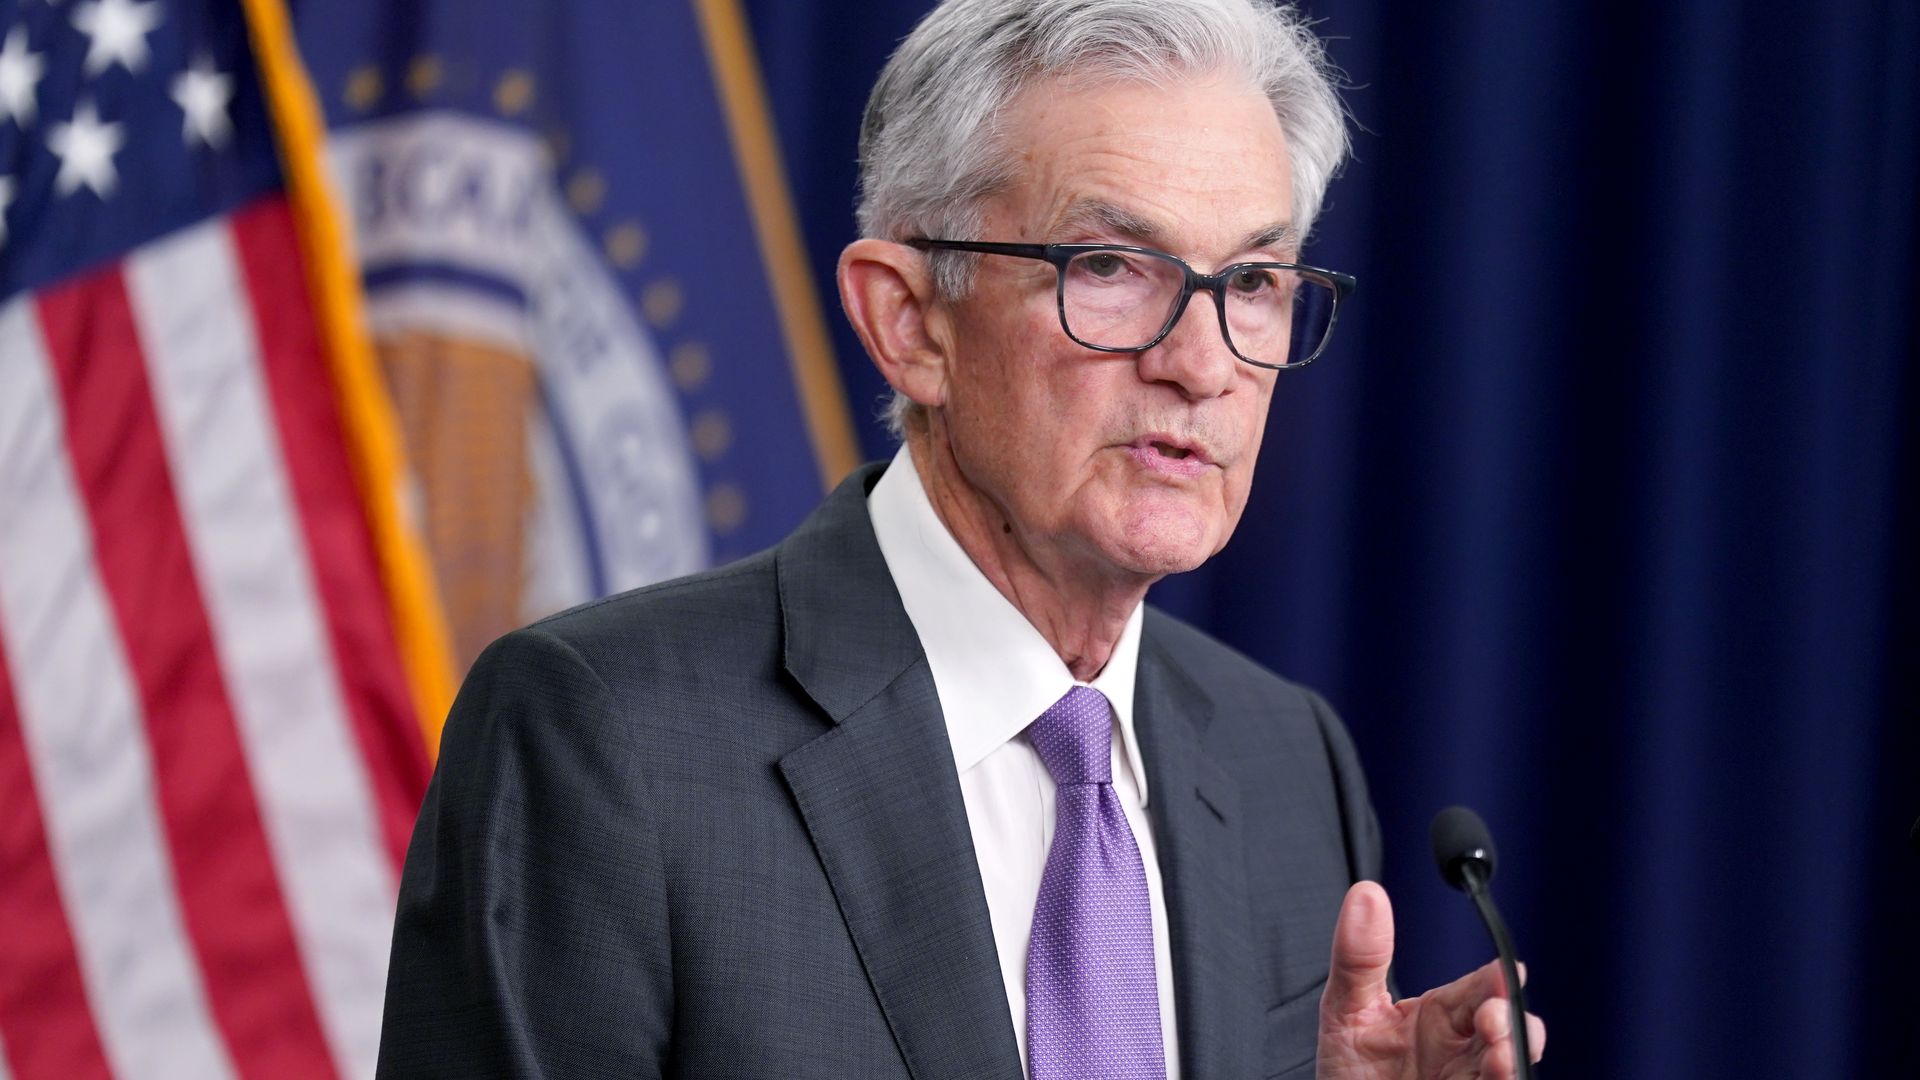 Fed chair Jerome Powell at a press conference